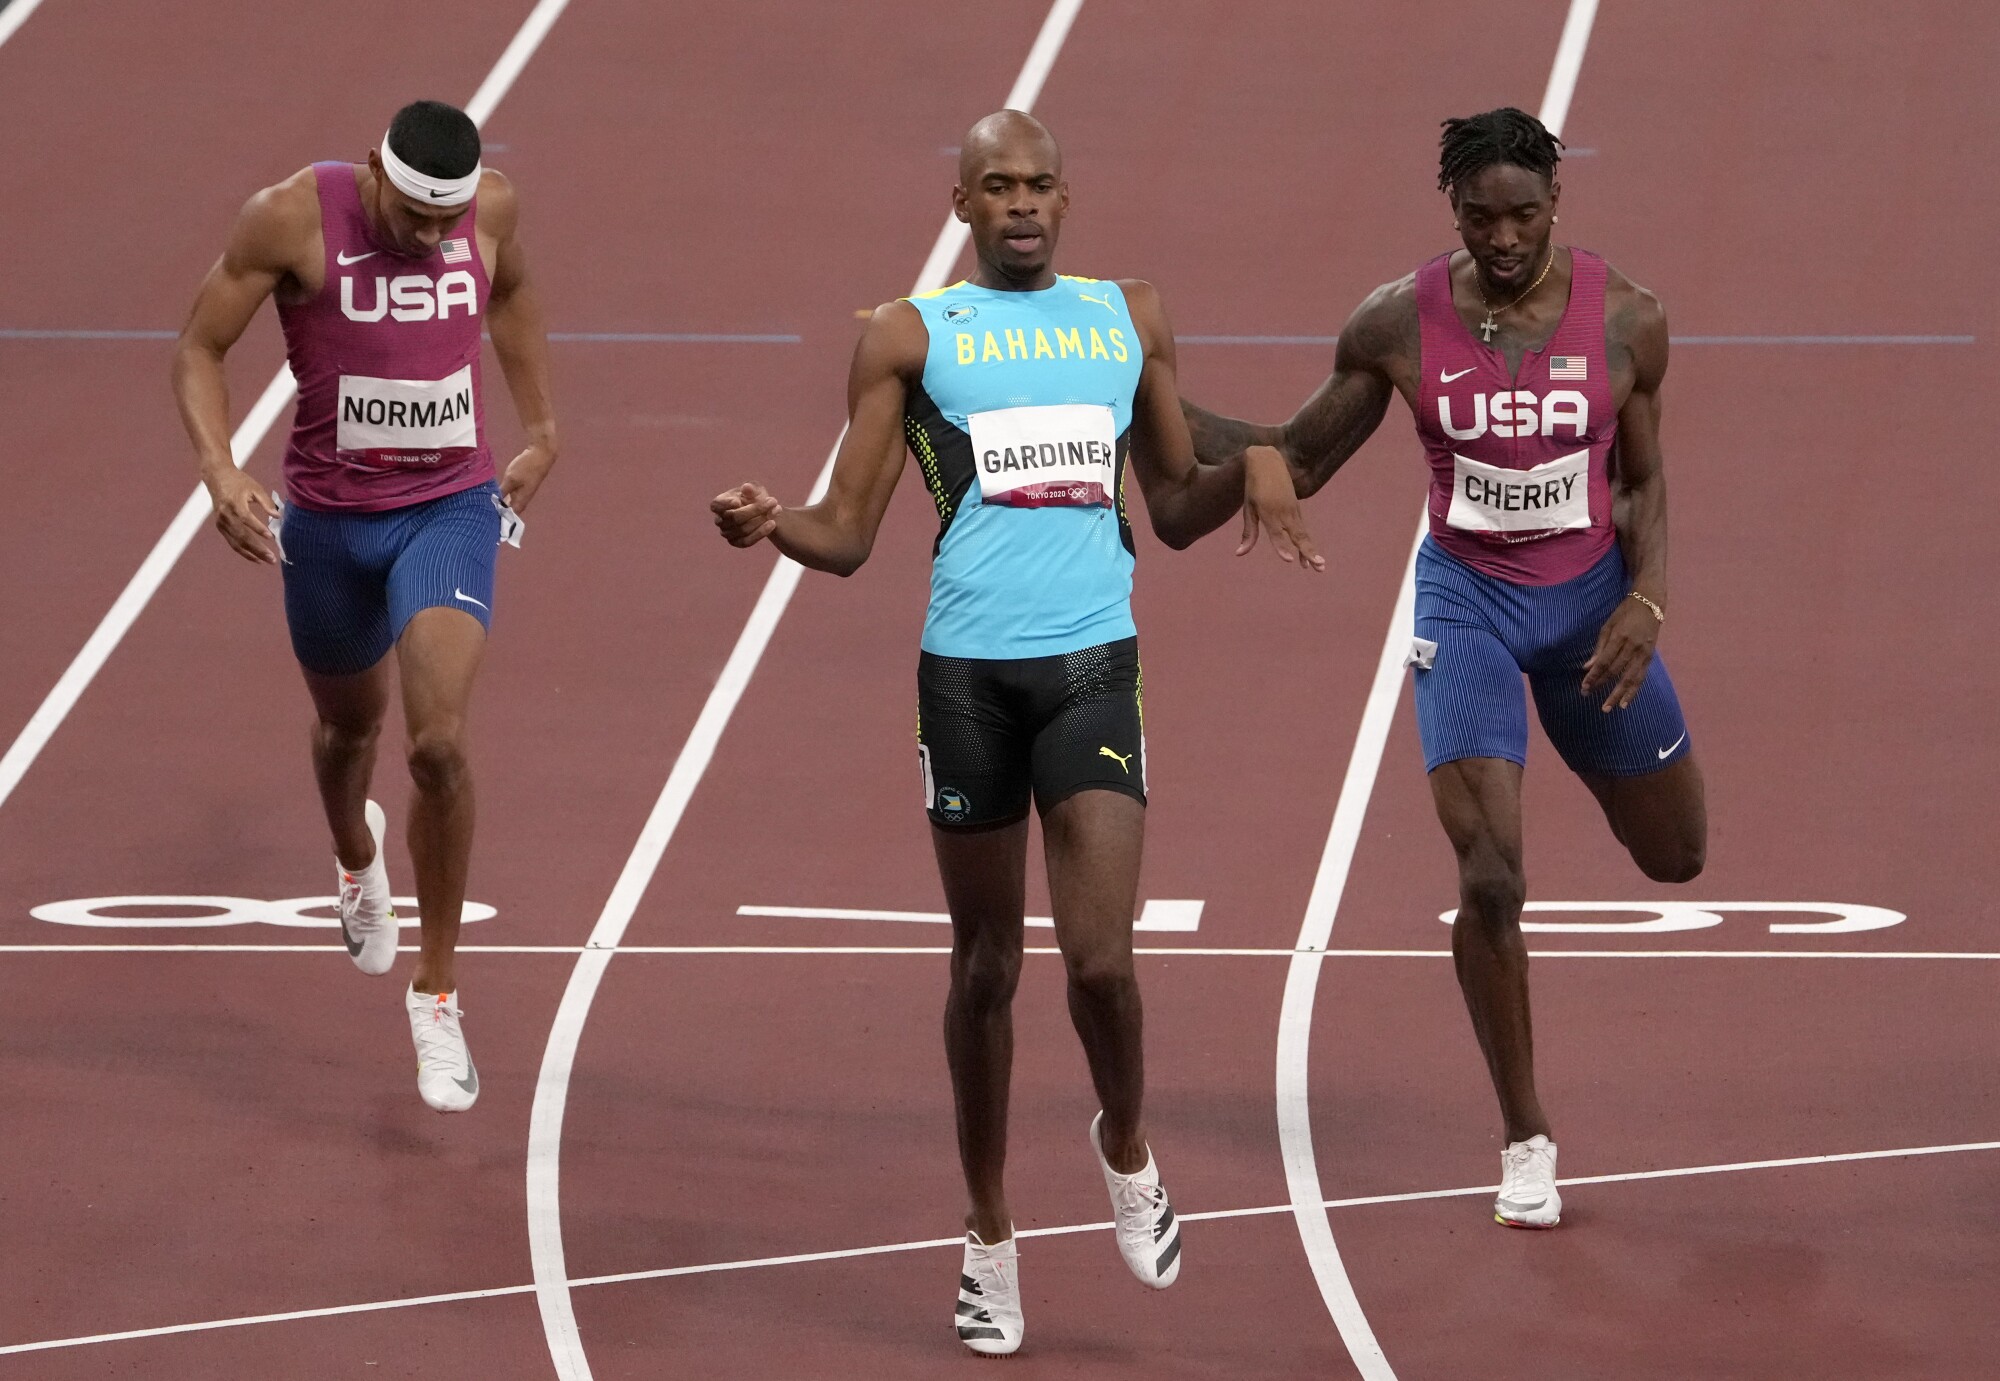 Steven Gardiner wins the gold medal in the 400 meters ahead of Americans Michael Norman and Michael Cherry at the Tokyo Olympics.